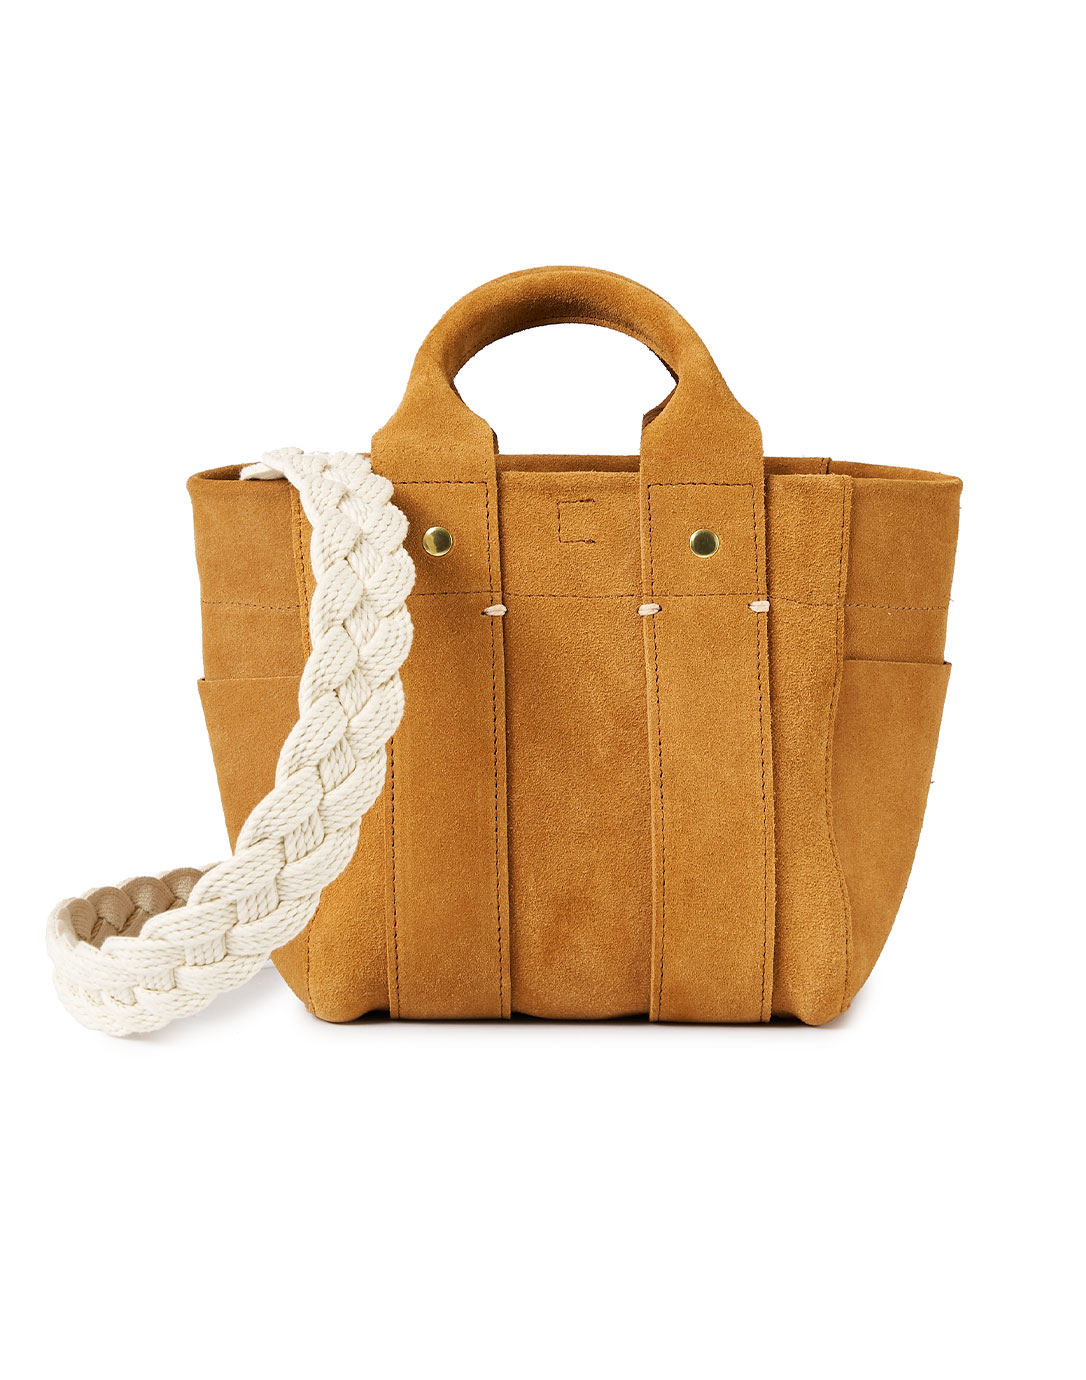 Clare V Brown Leather Tote Clare Vivier Shopping Bag